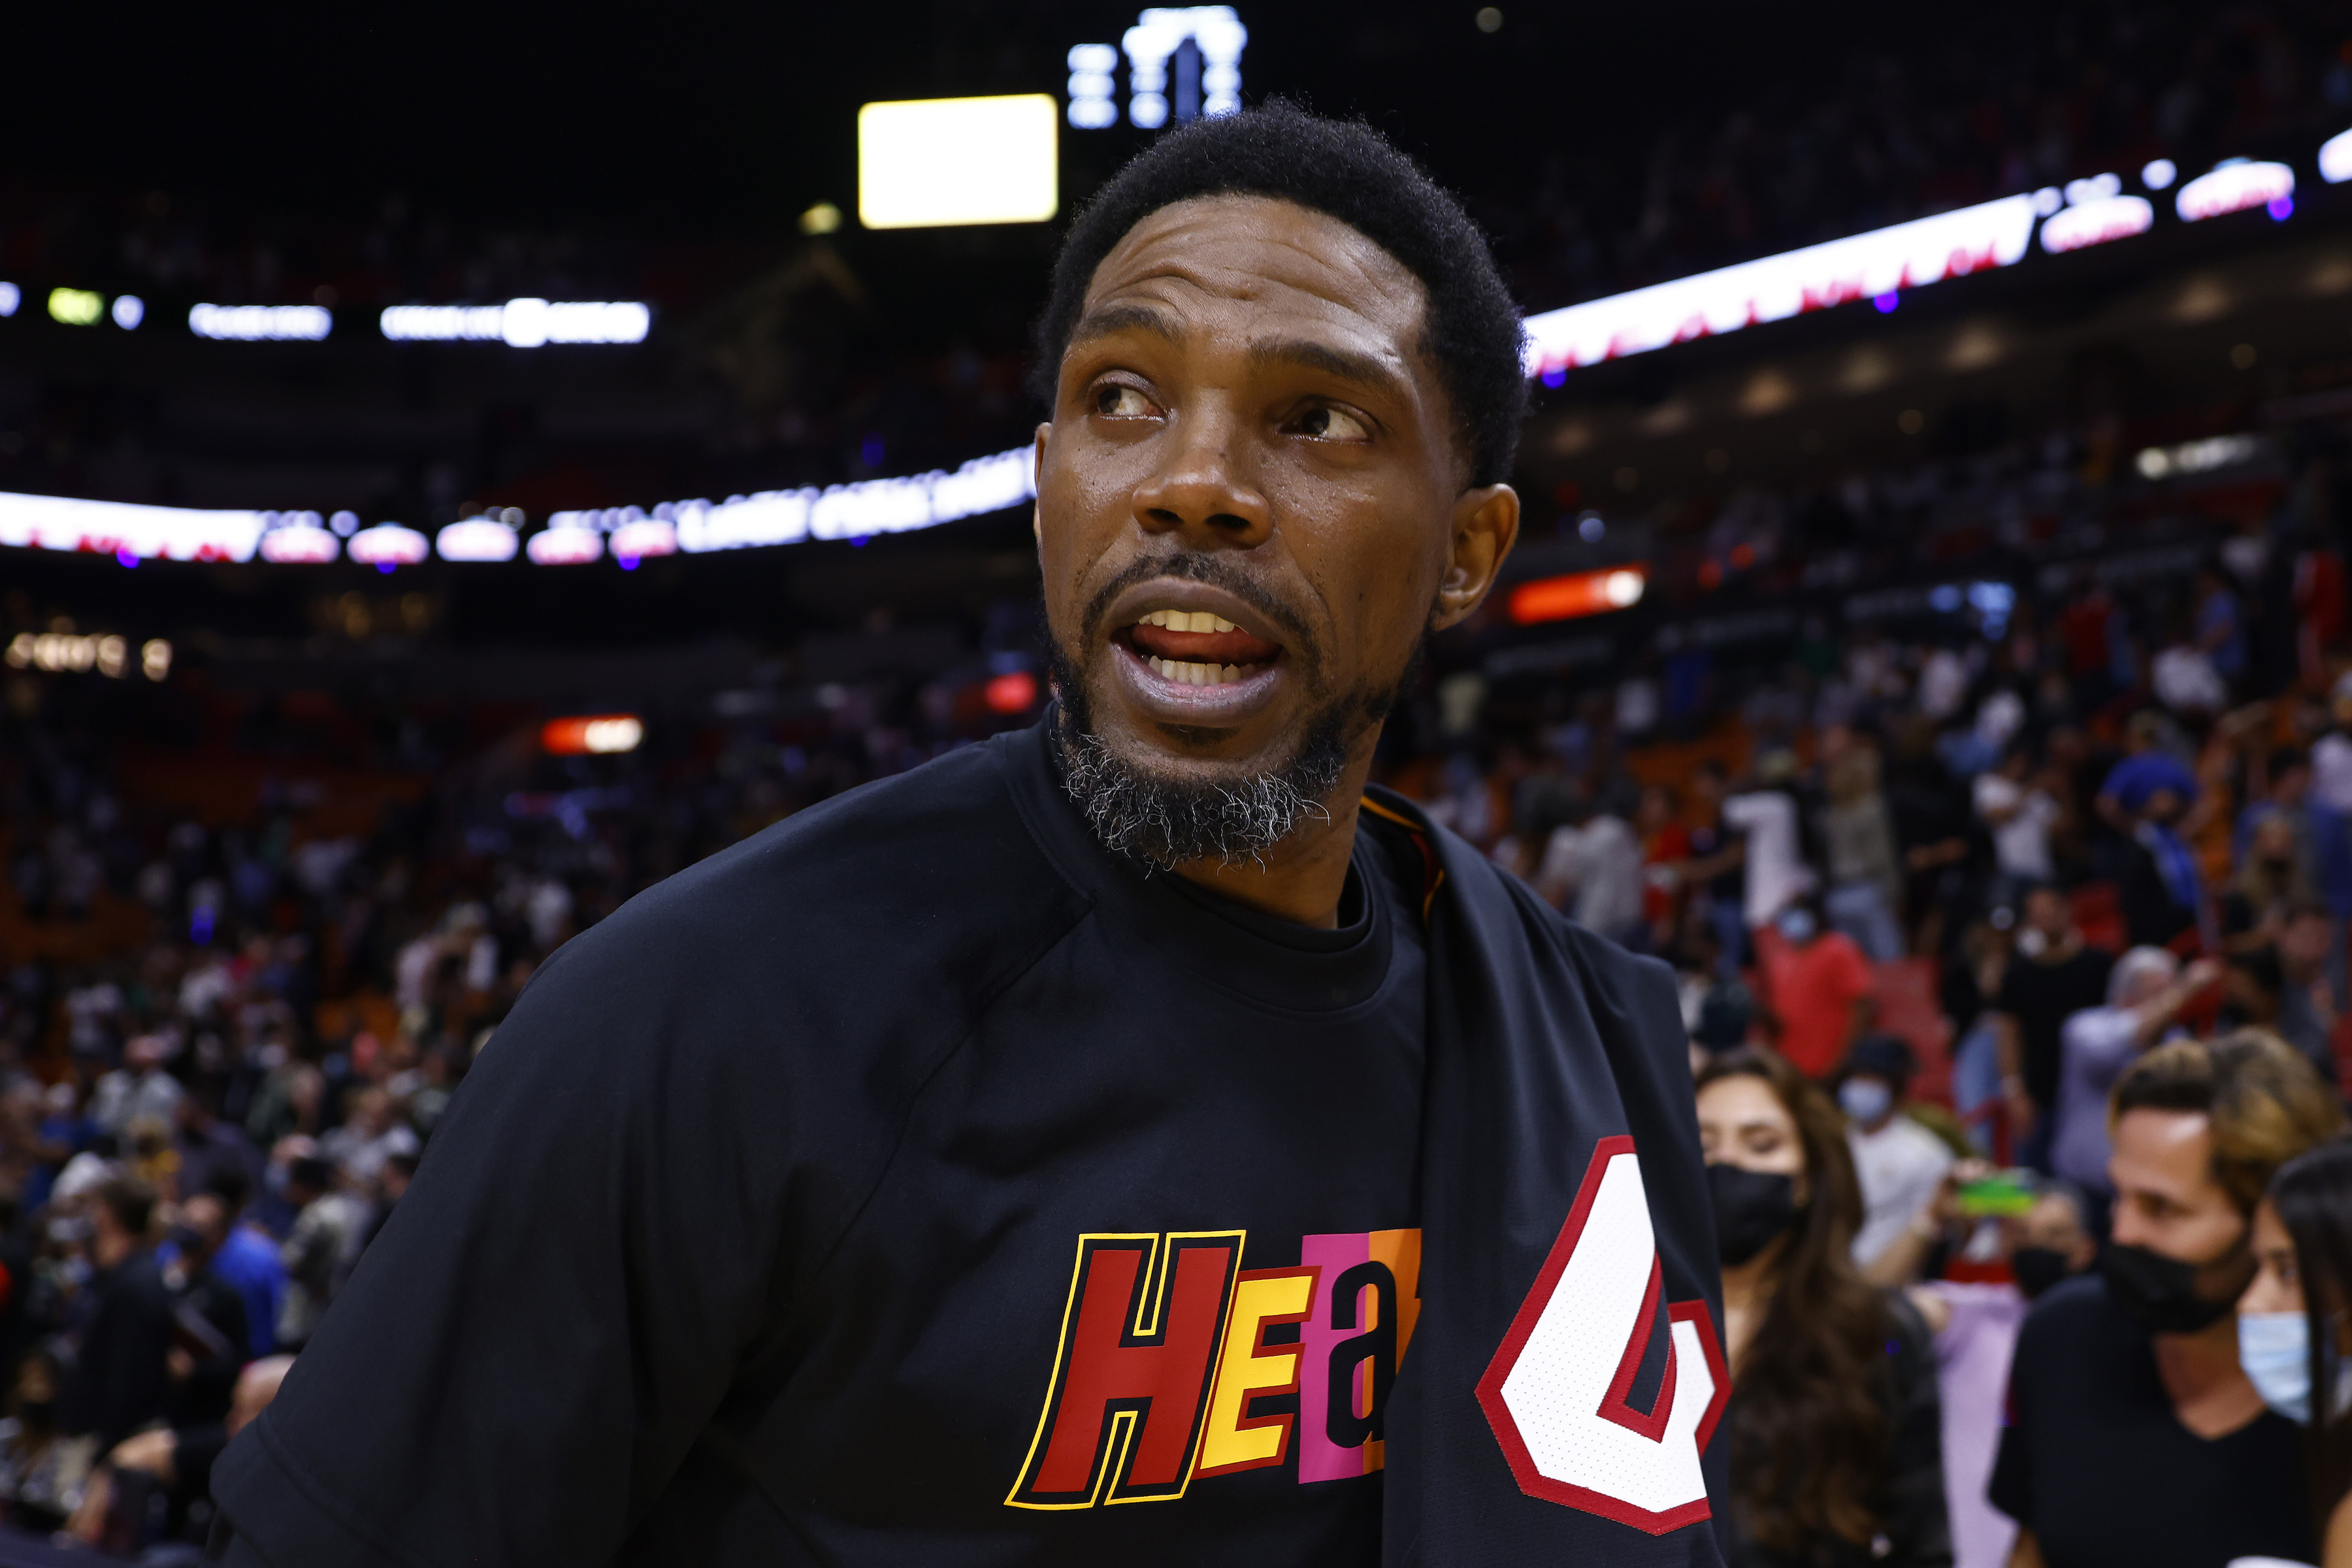 Miami Heat veteran Udonis Haslem reacts during a game against the Milwaukee Bucks